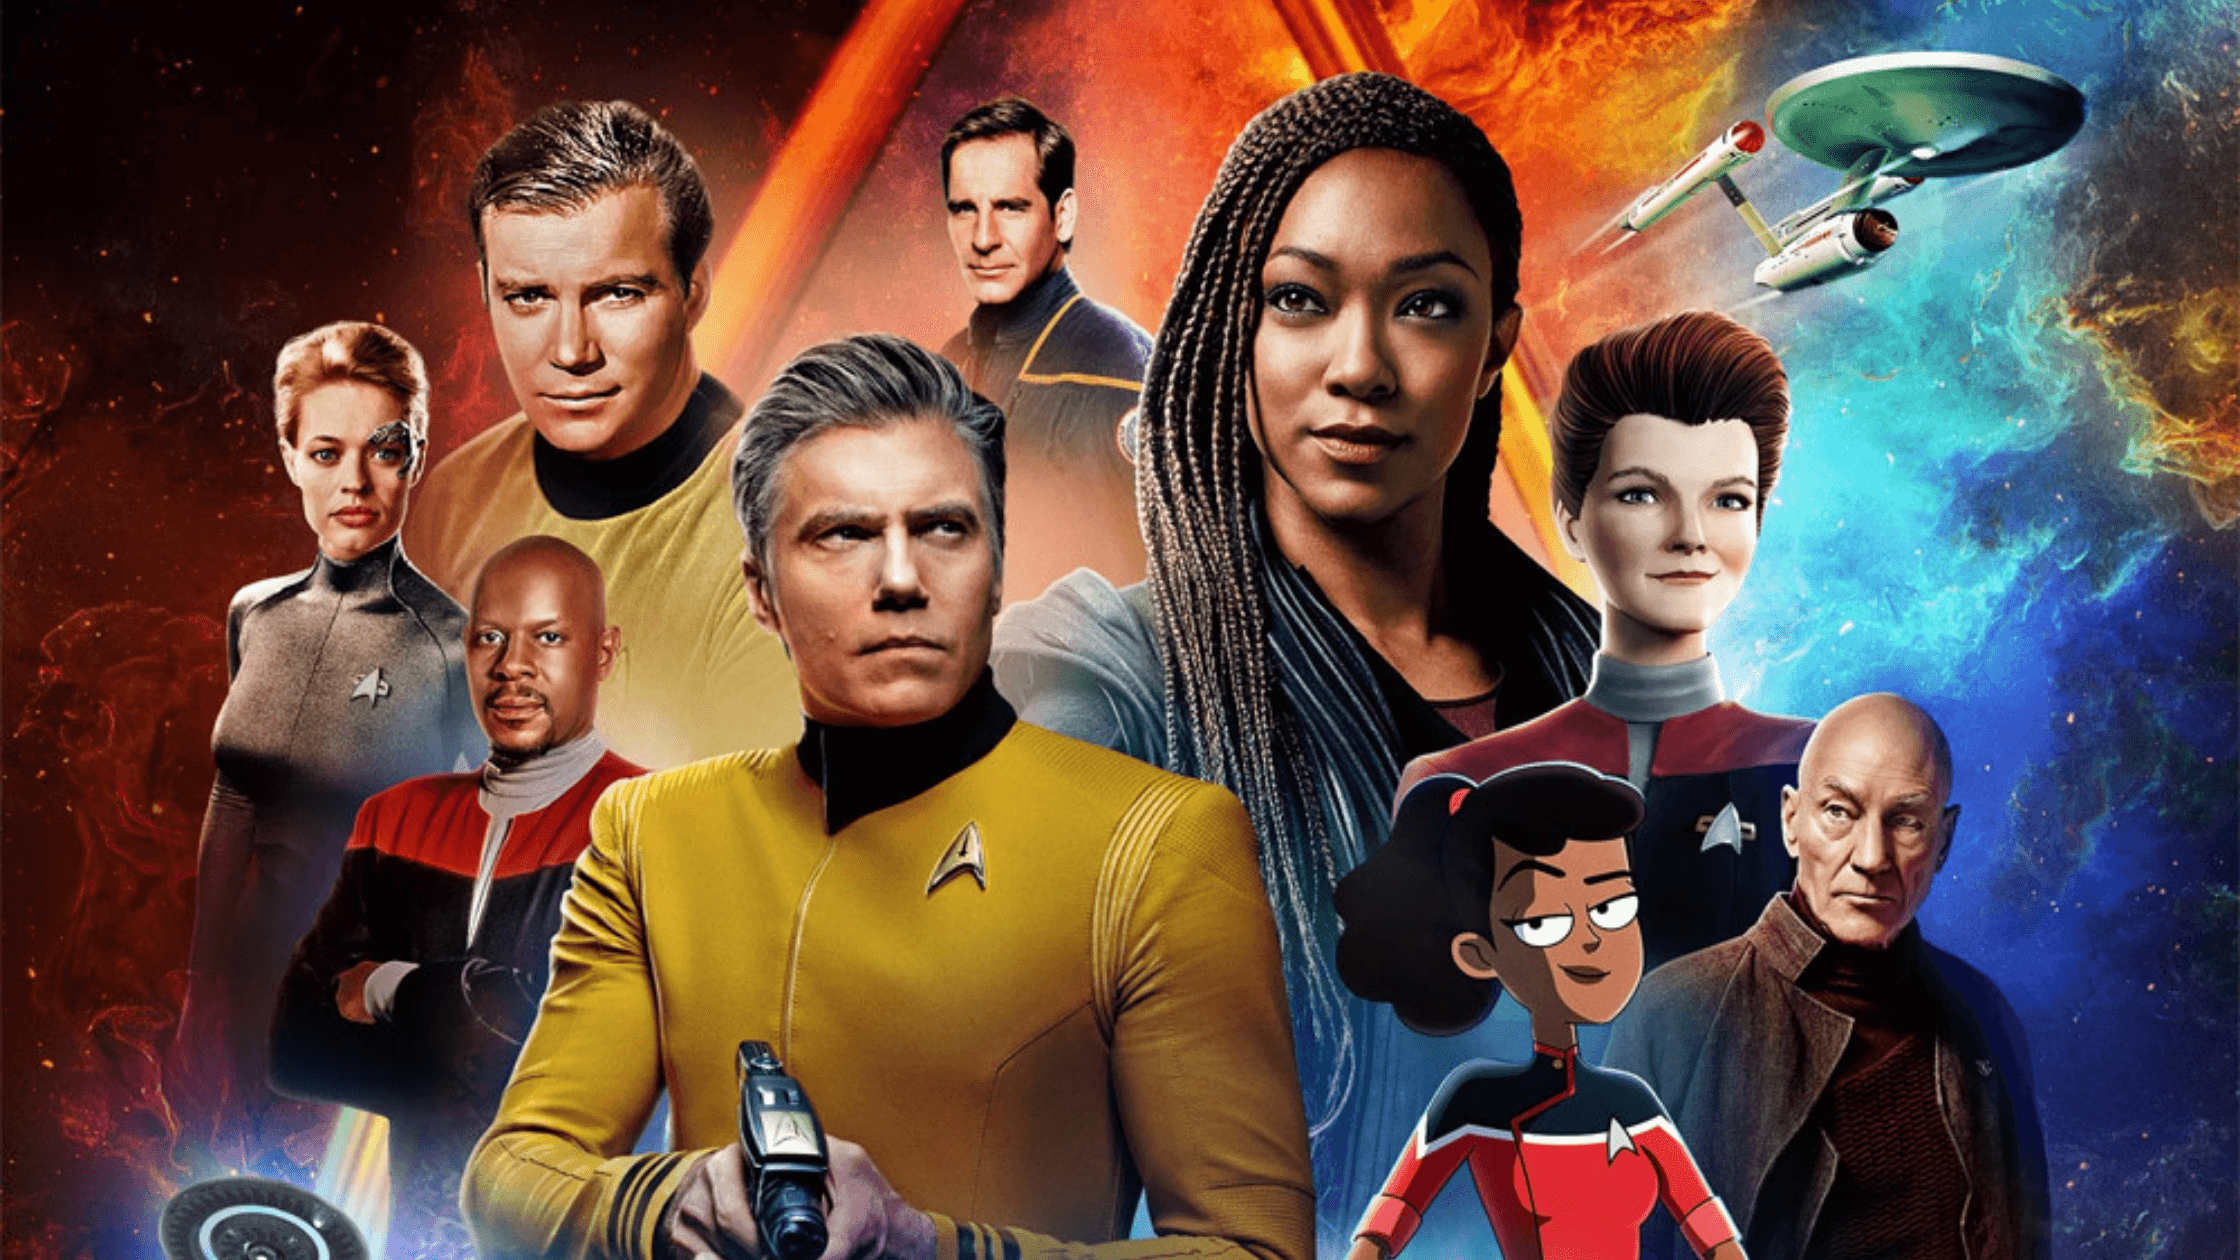 Star Trek Return Confirmed!! Count Down Starts The Release Date, Cast, Plot, And The Expected Spoiler!